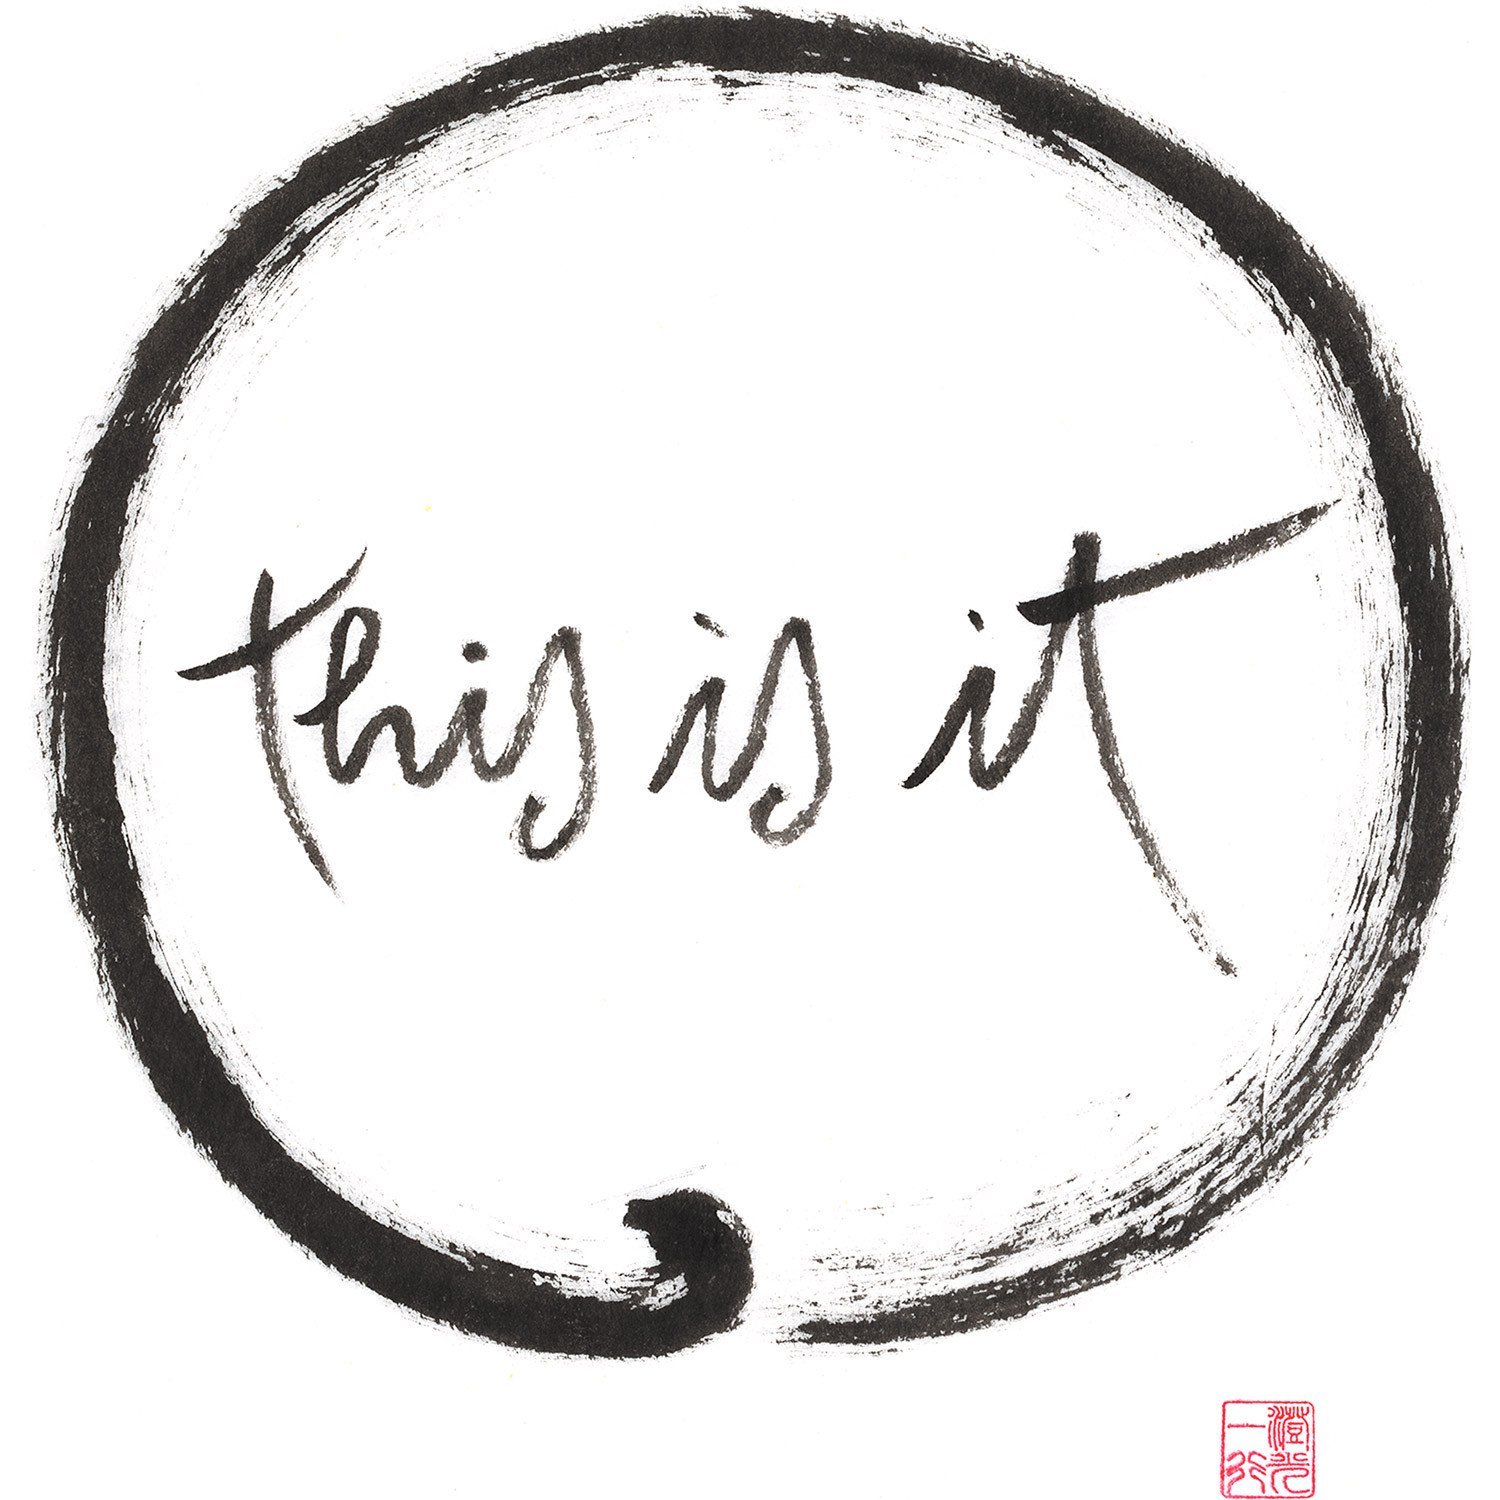 Enso painting with calligraphy: "This is it"